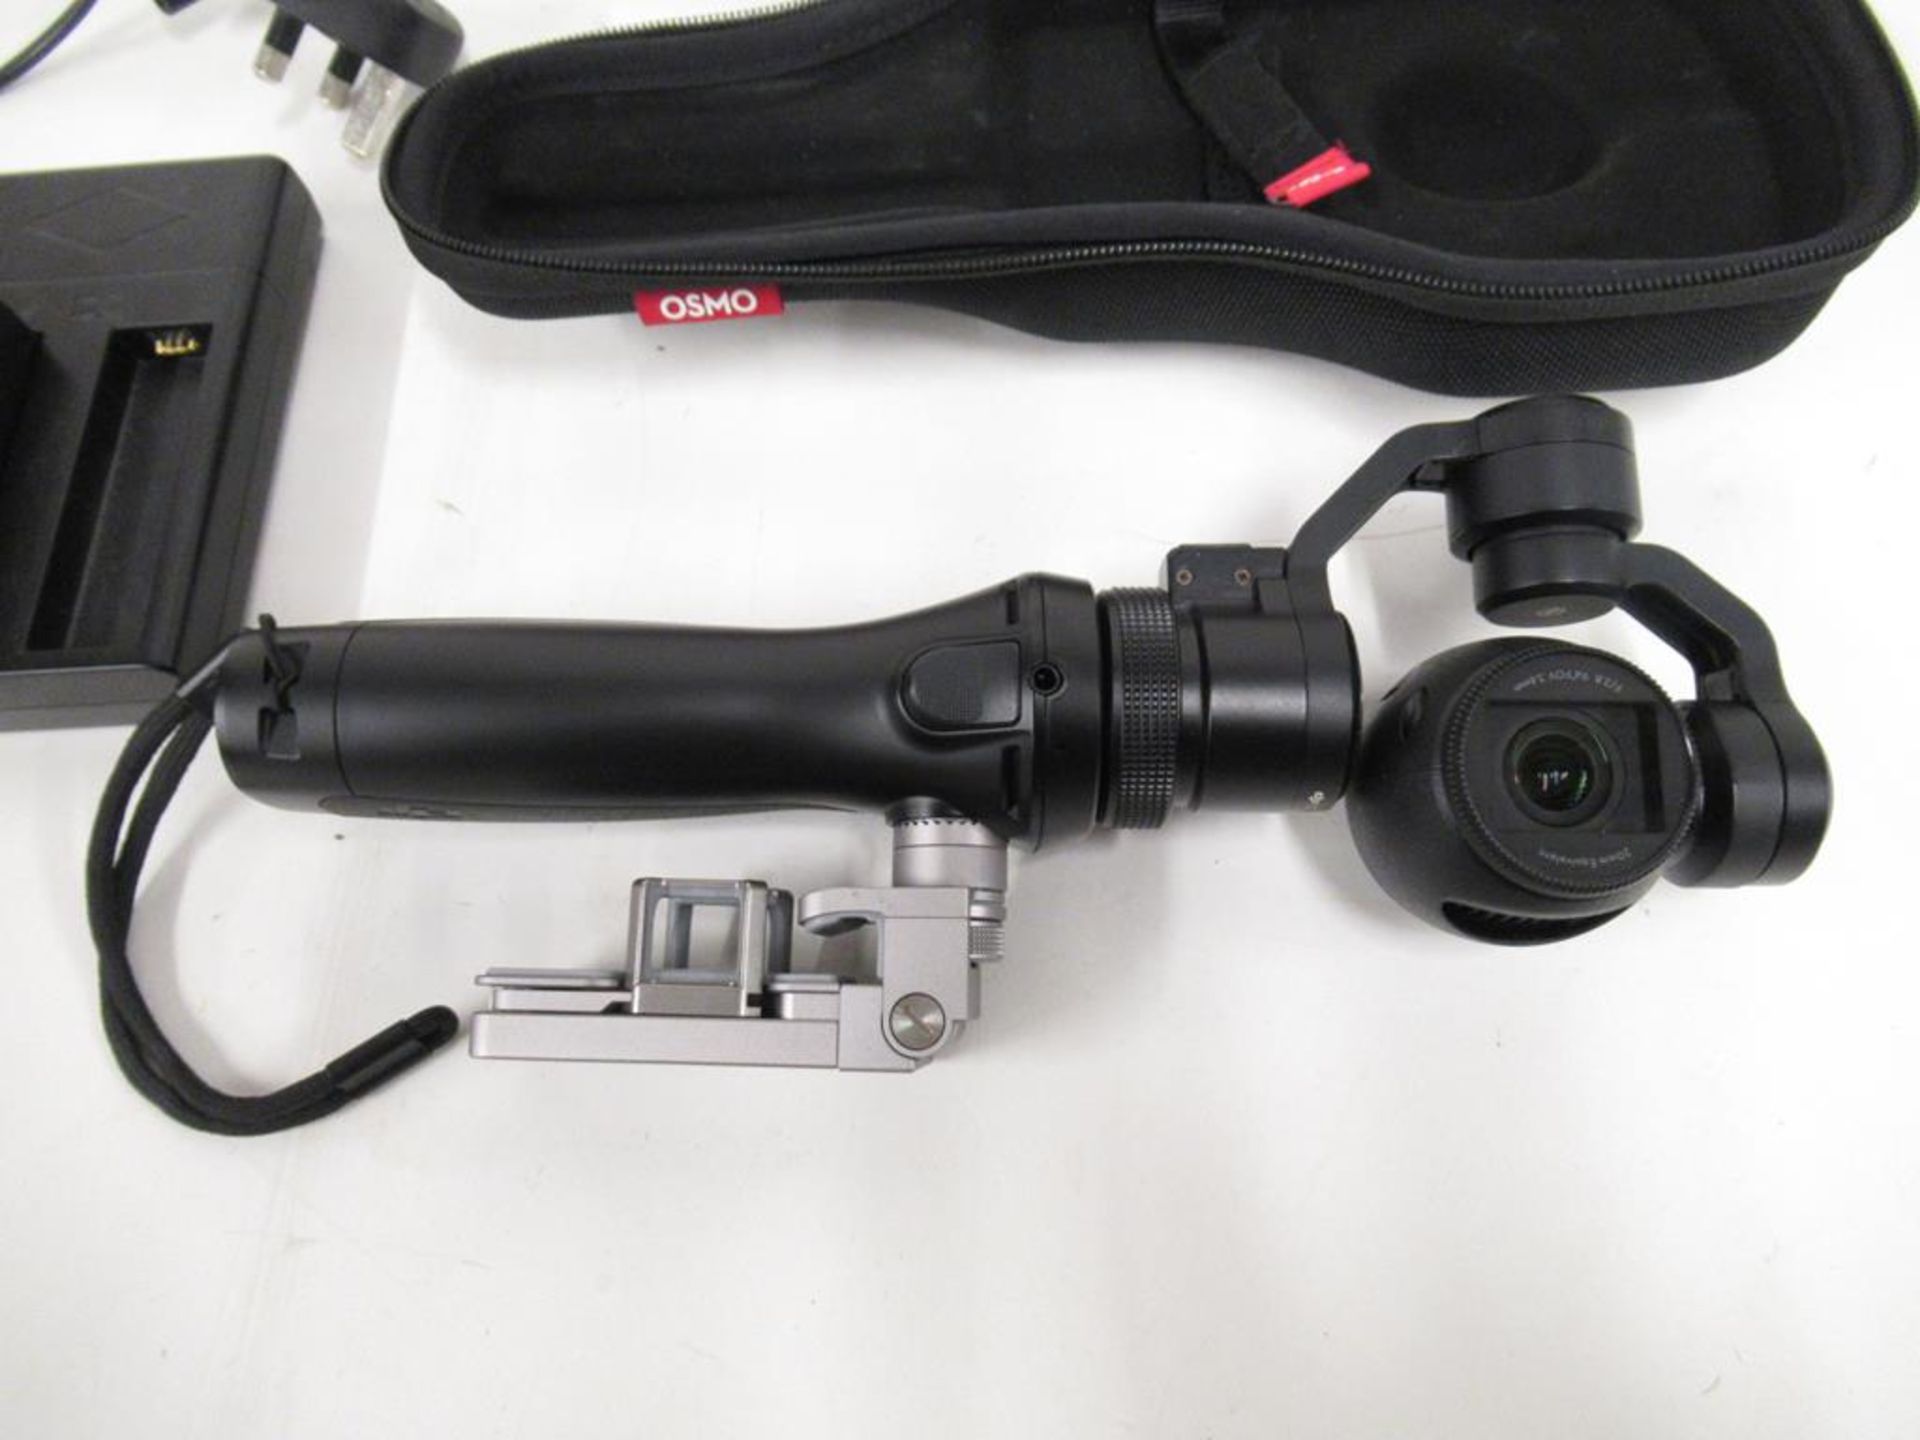 DJI Osmo Zenmuse X3 Hand Held Gimbal and Camera with Batteries and Smatree Charger - Image 2 of 10